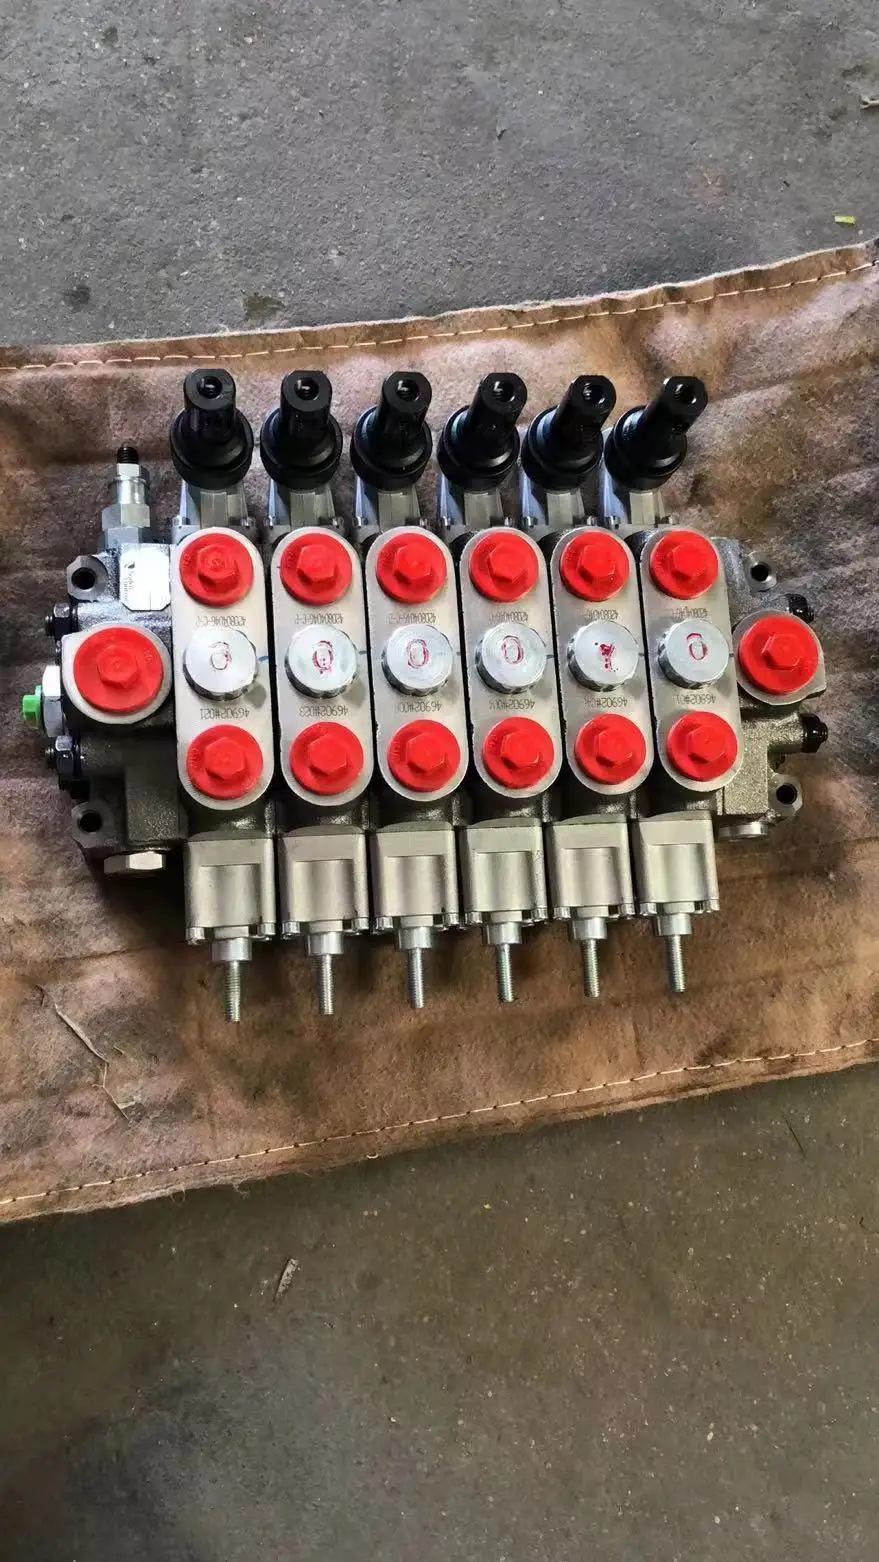 Sectional  hydraulic directional valves  6 spools   polit control   rated flow  80L/min  350bar